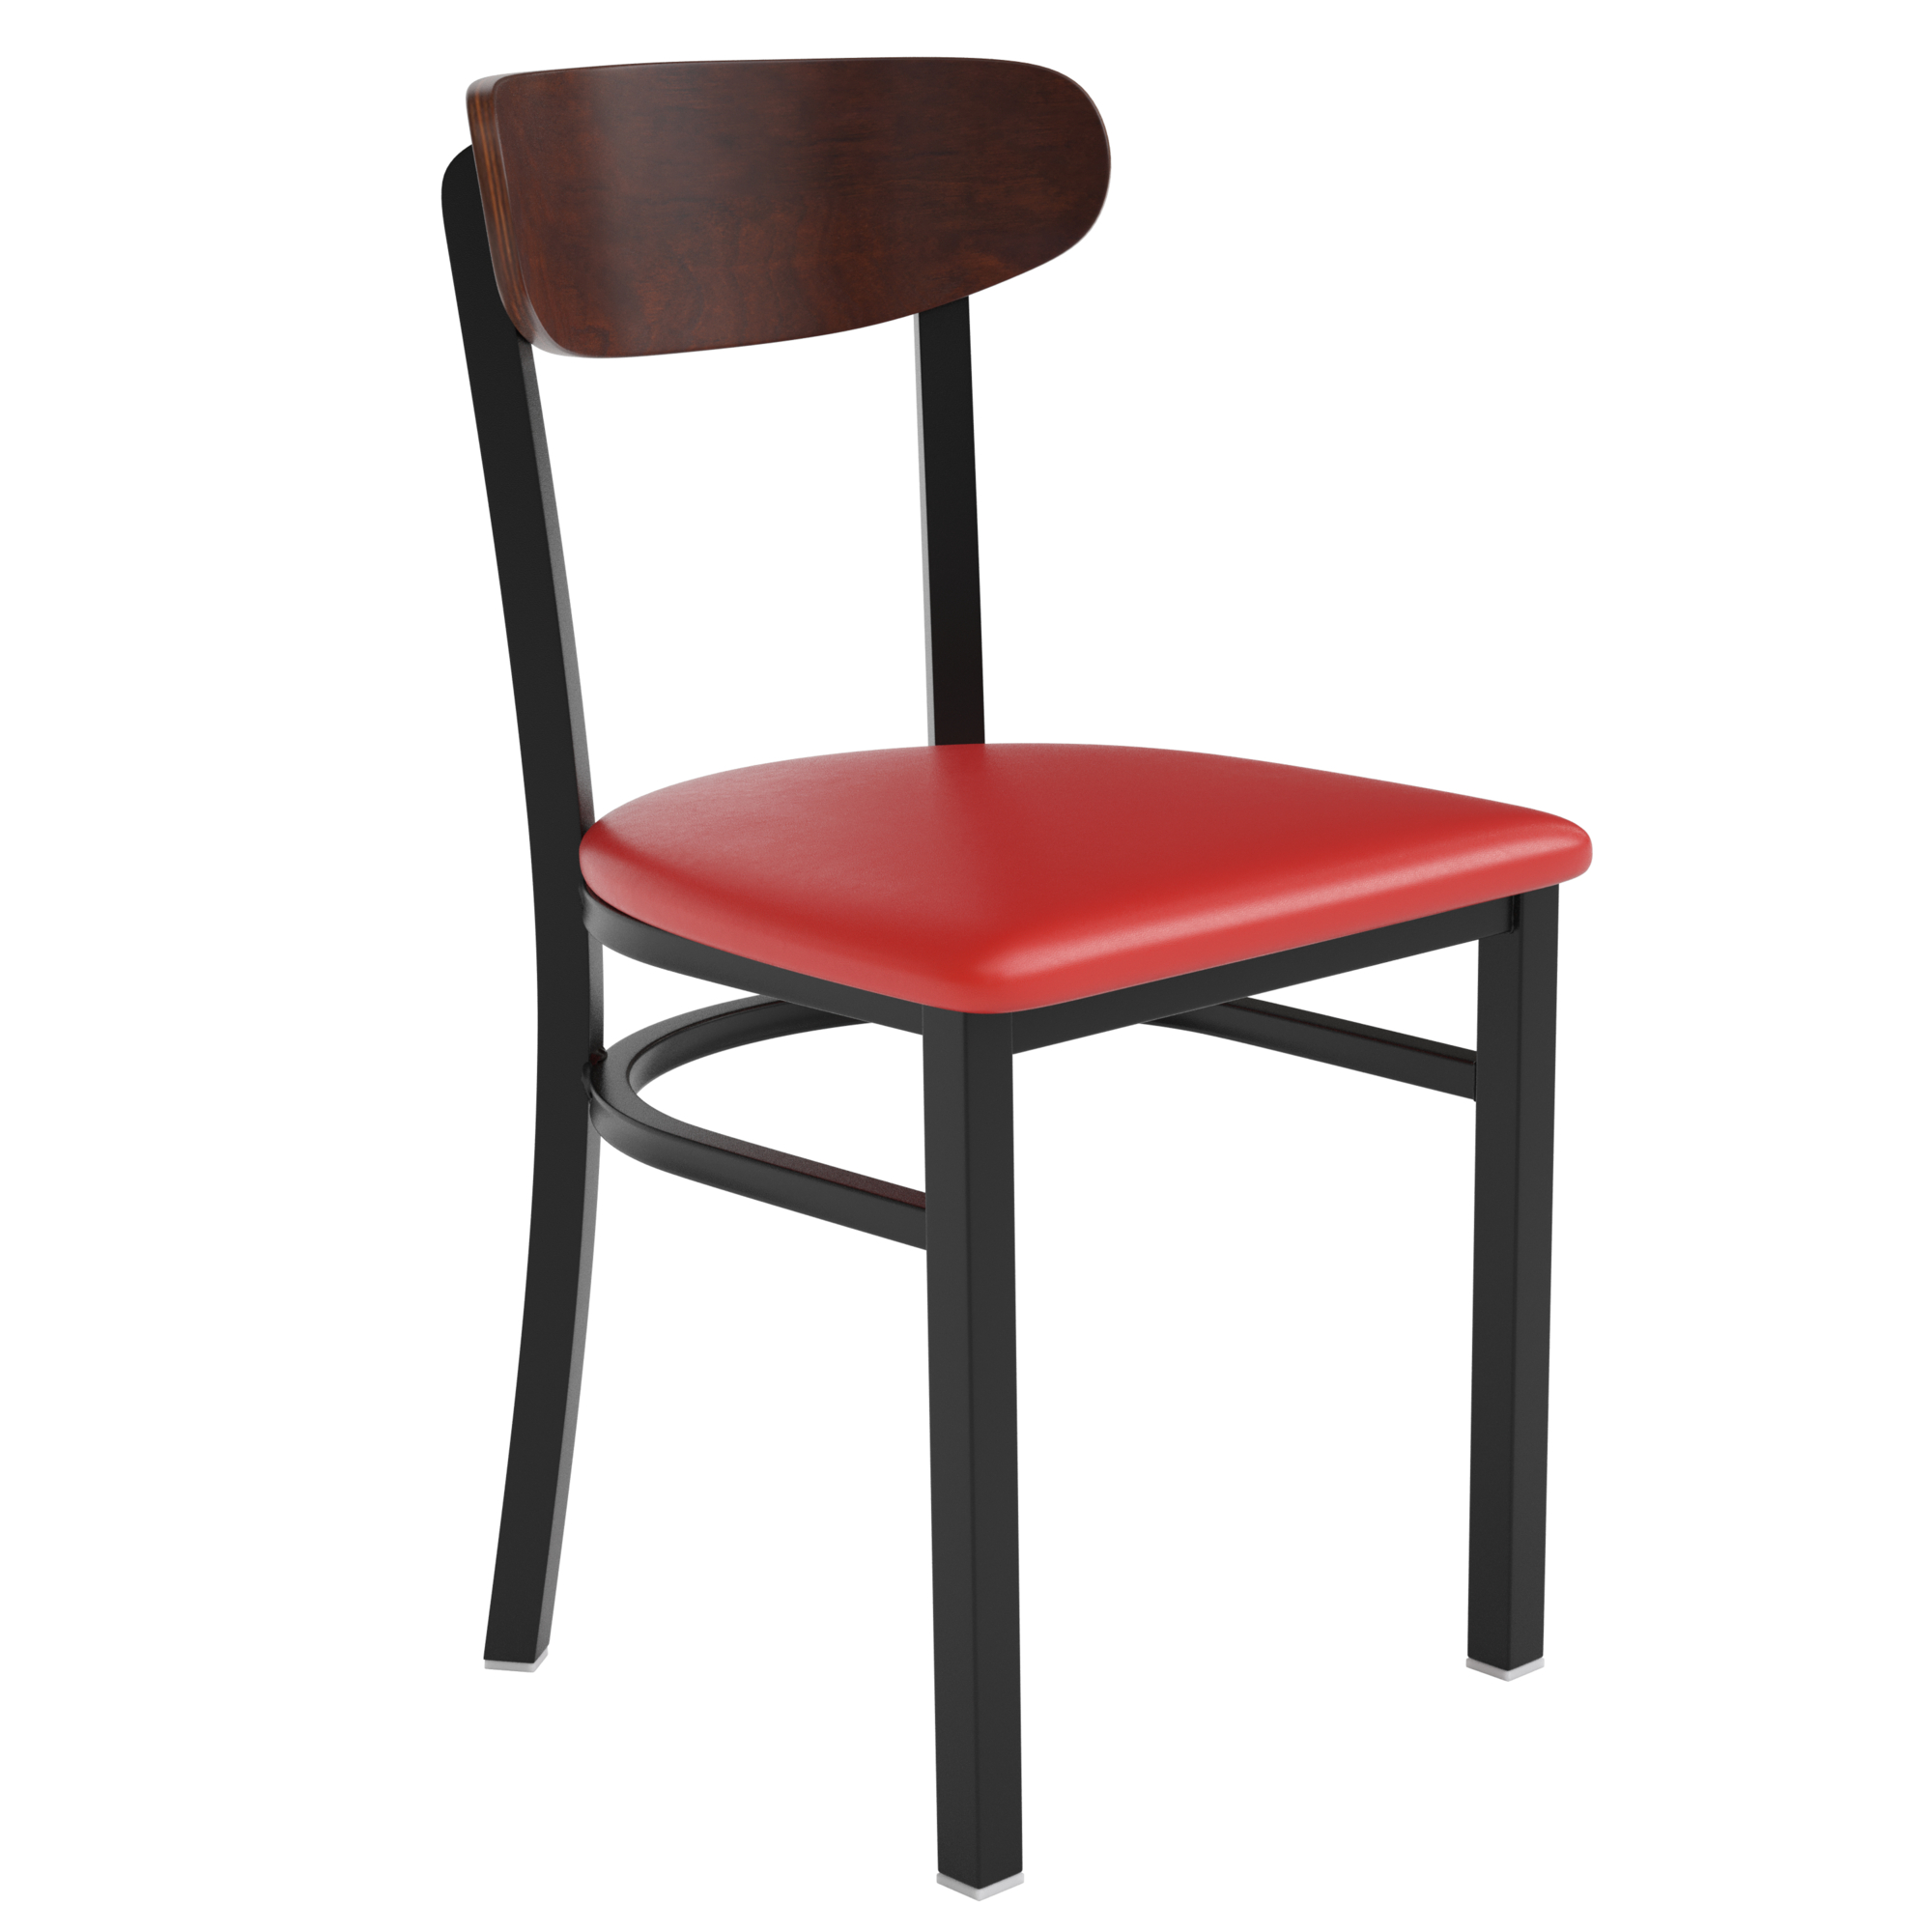 Flash Furniture, Red Vinyl Seat Dining Chair with Walnut Wood Back, Primary Color Red, Included (qty.) 1, Model XUDG6V5RDVWAL